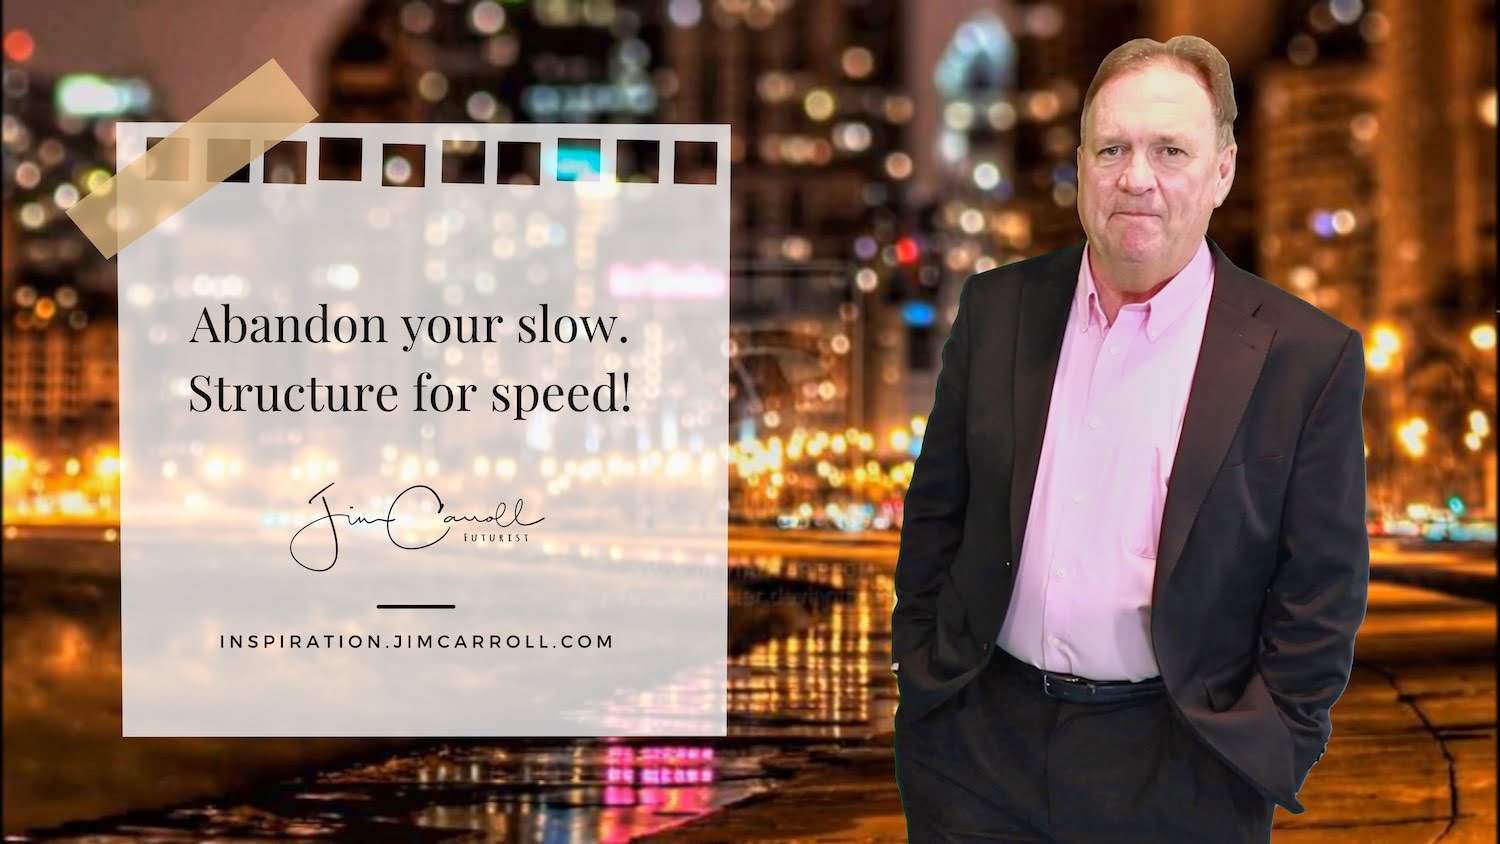 Daily Inspiration: "Abandon your slow. Structure for speed!"